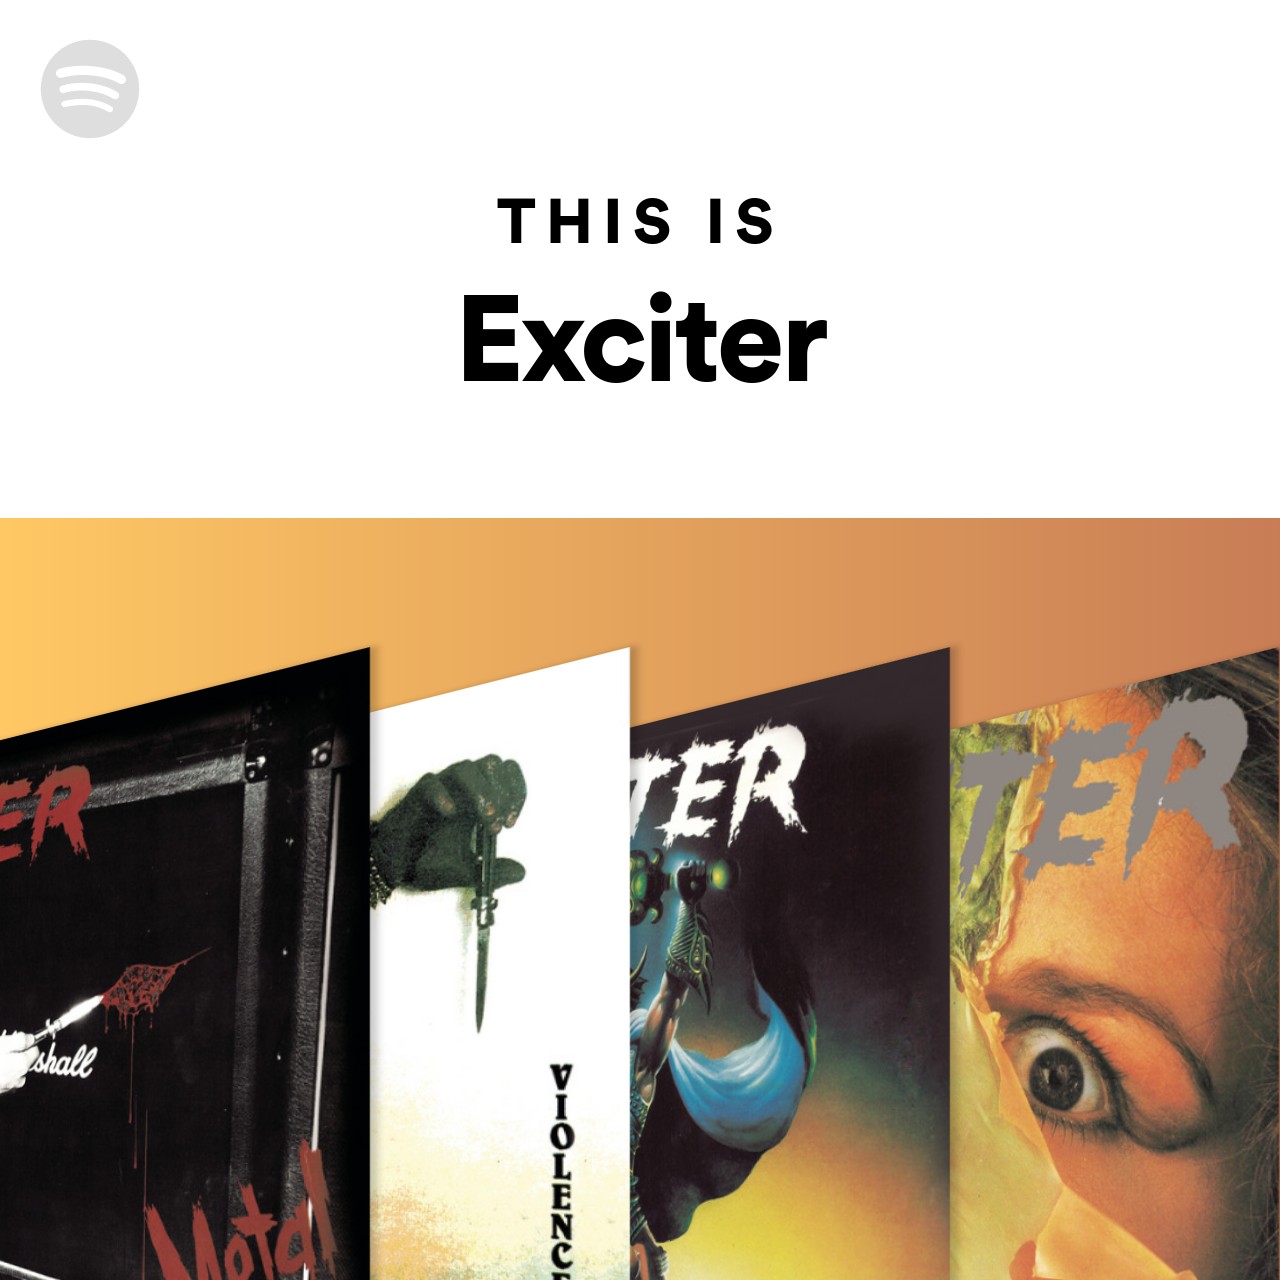 This Is Exciter